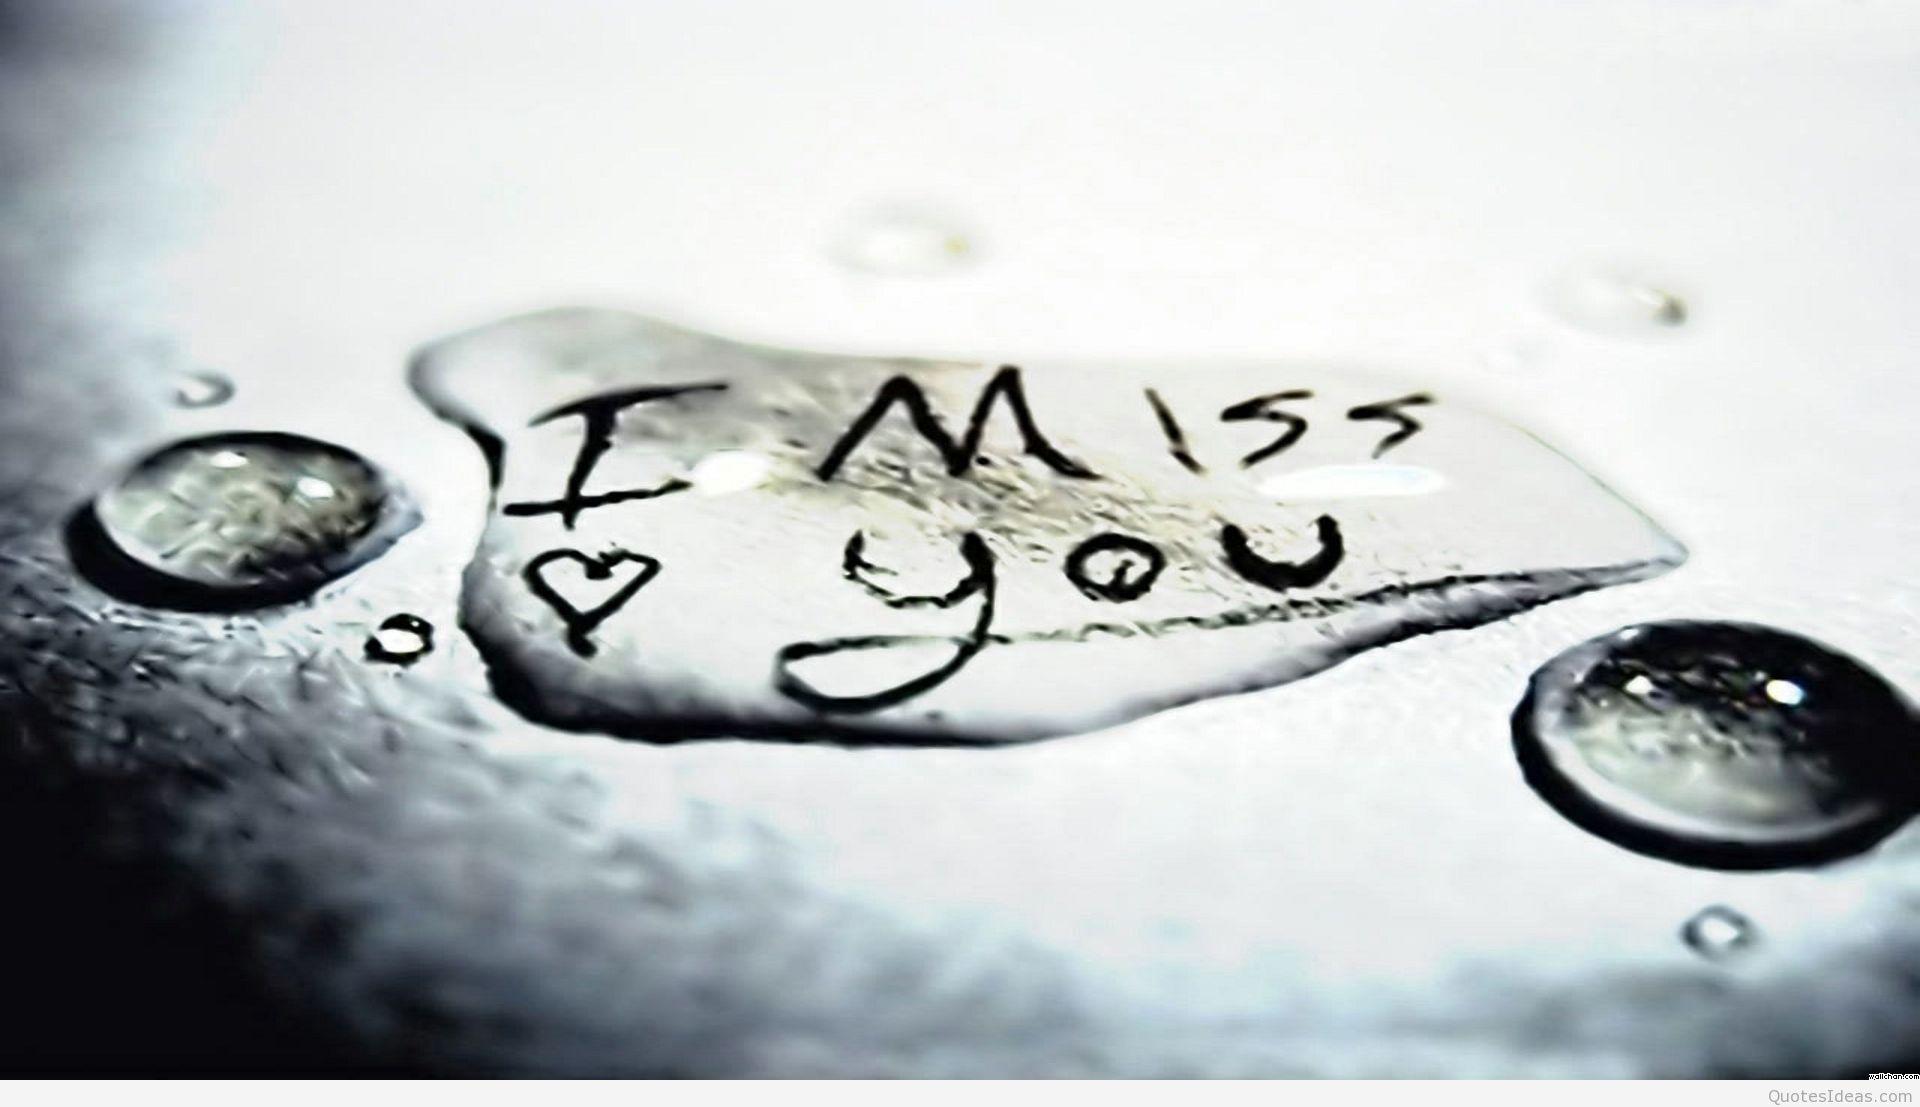 i miss you wallpapers boy